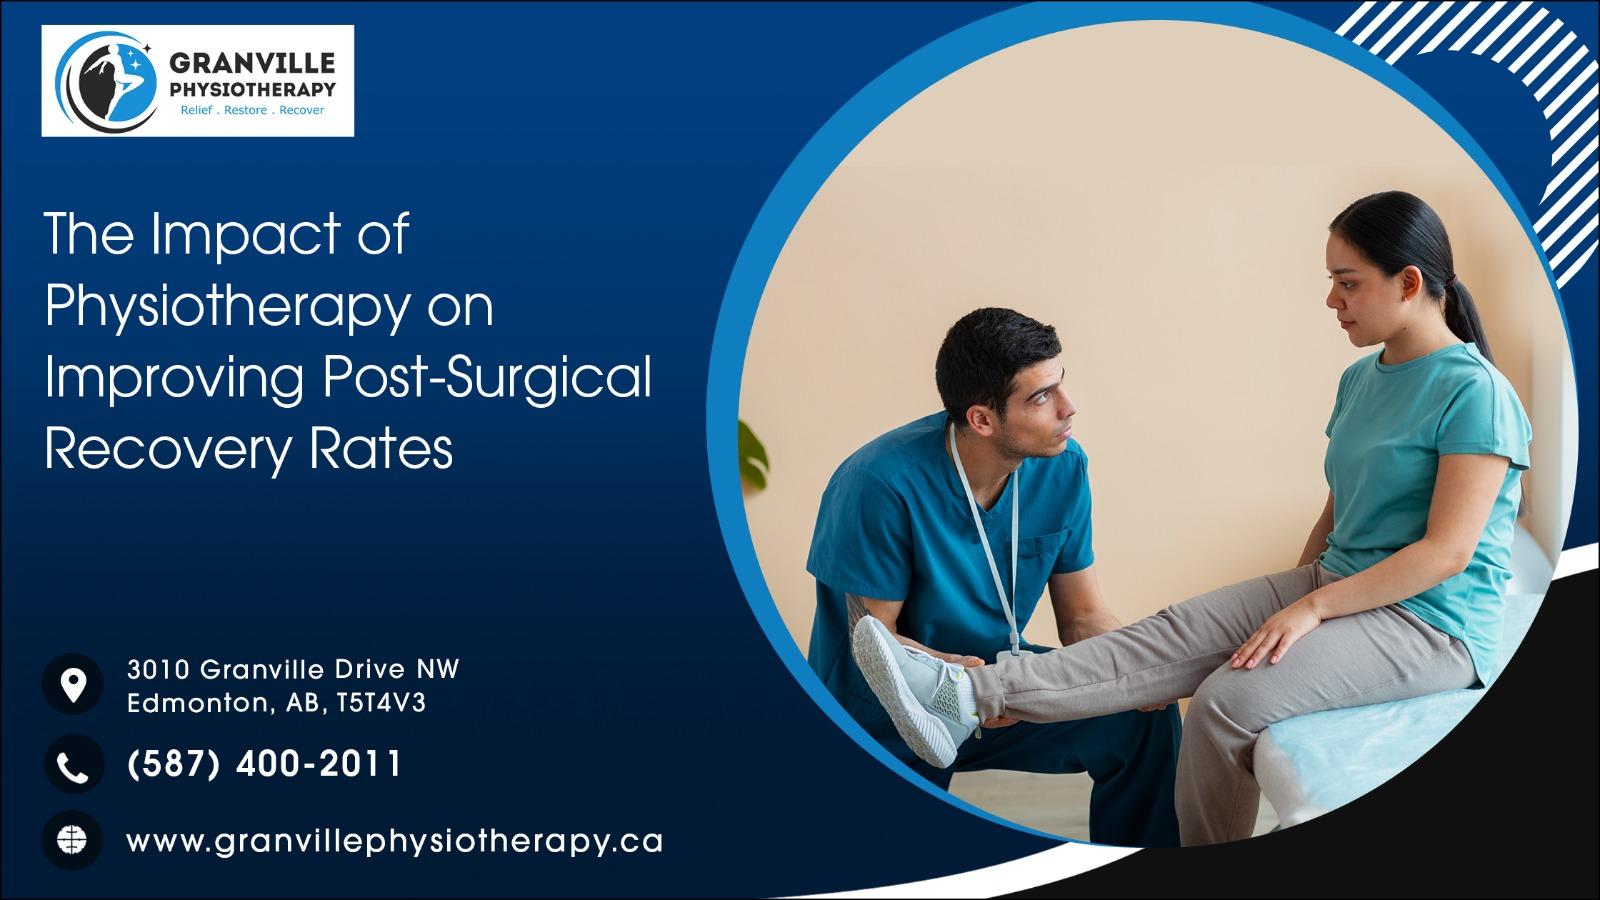 The Impact of Physiotherapy on Improving Post Surgical Recovery Rates